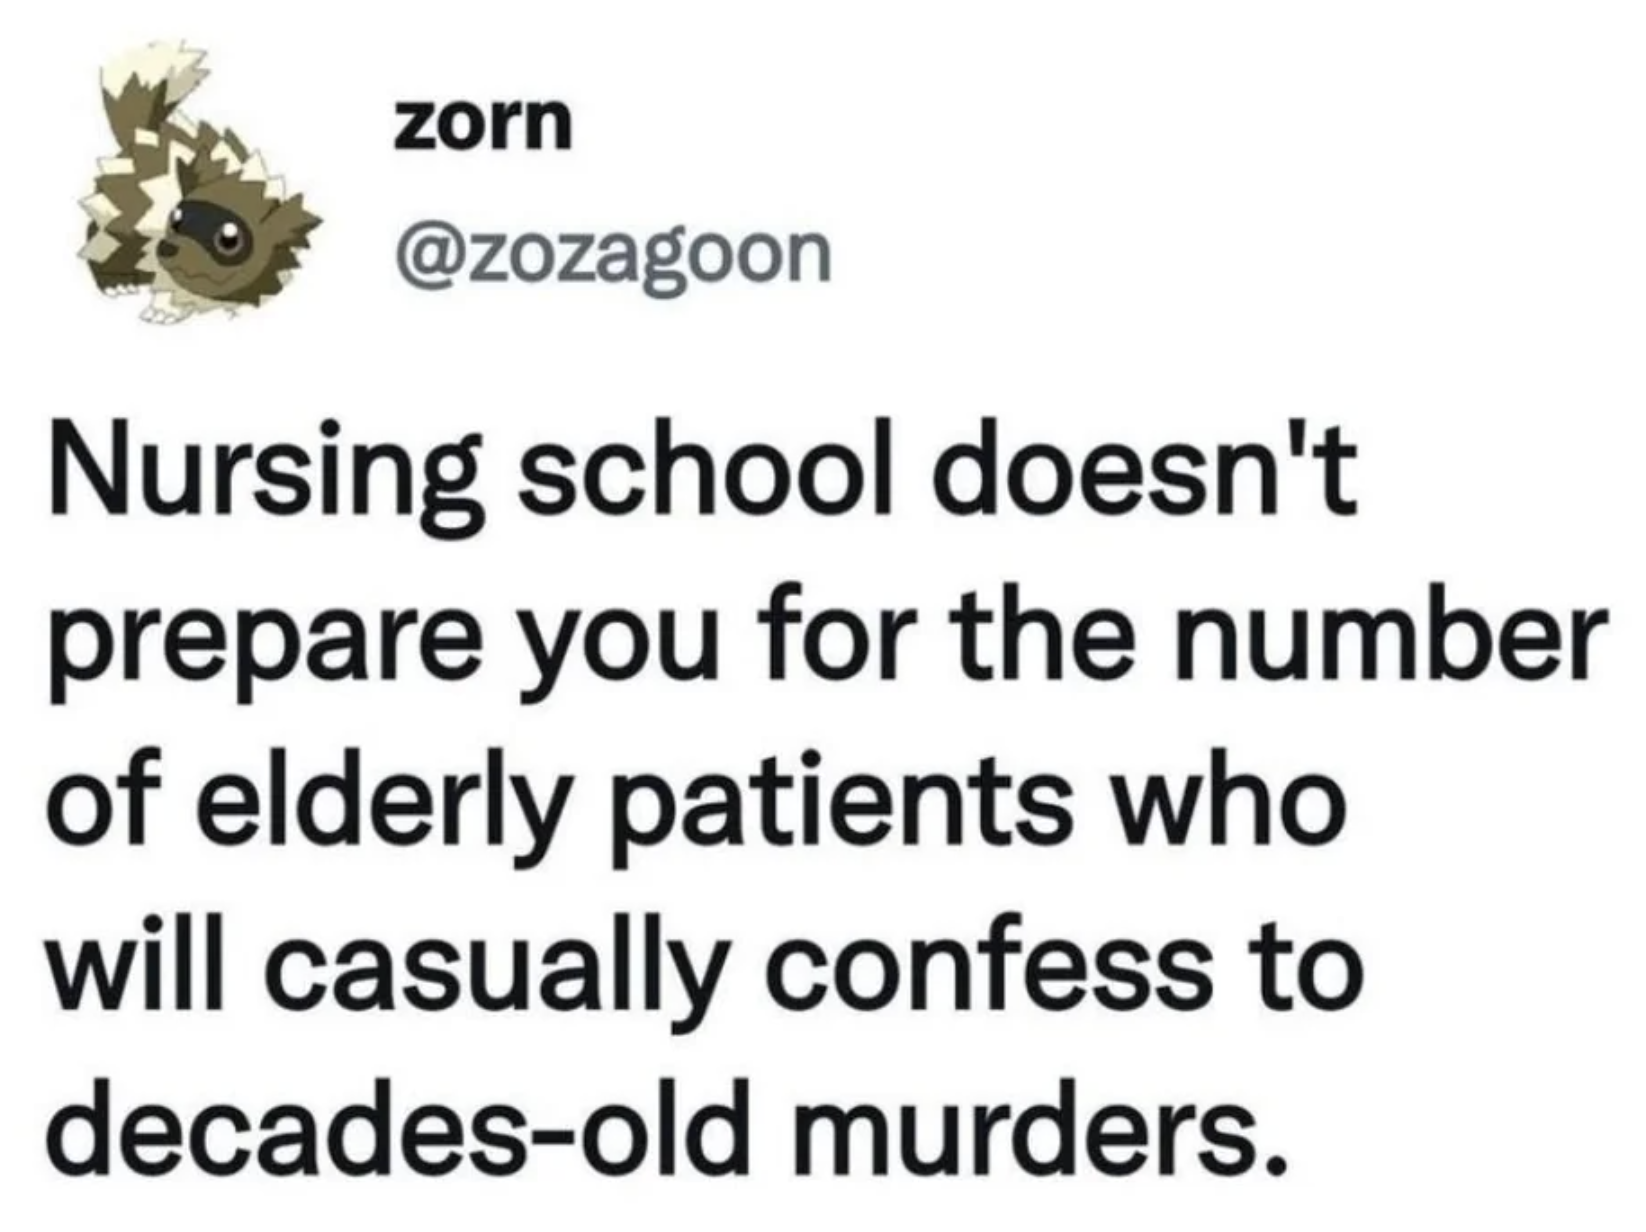 circle - zorn Nursing school doesn't prepare you for the number of elderly patients who will casually confess to decadesold murders.